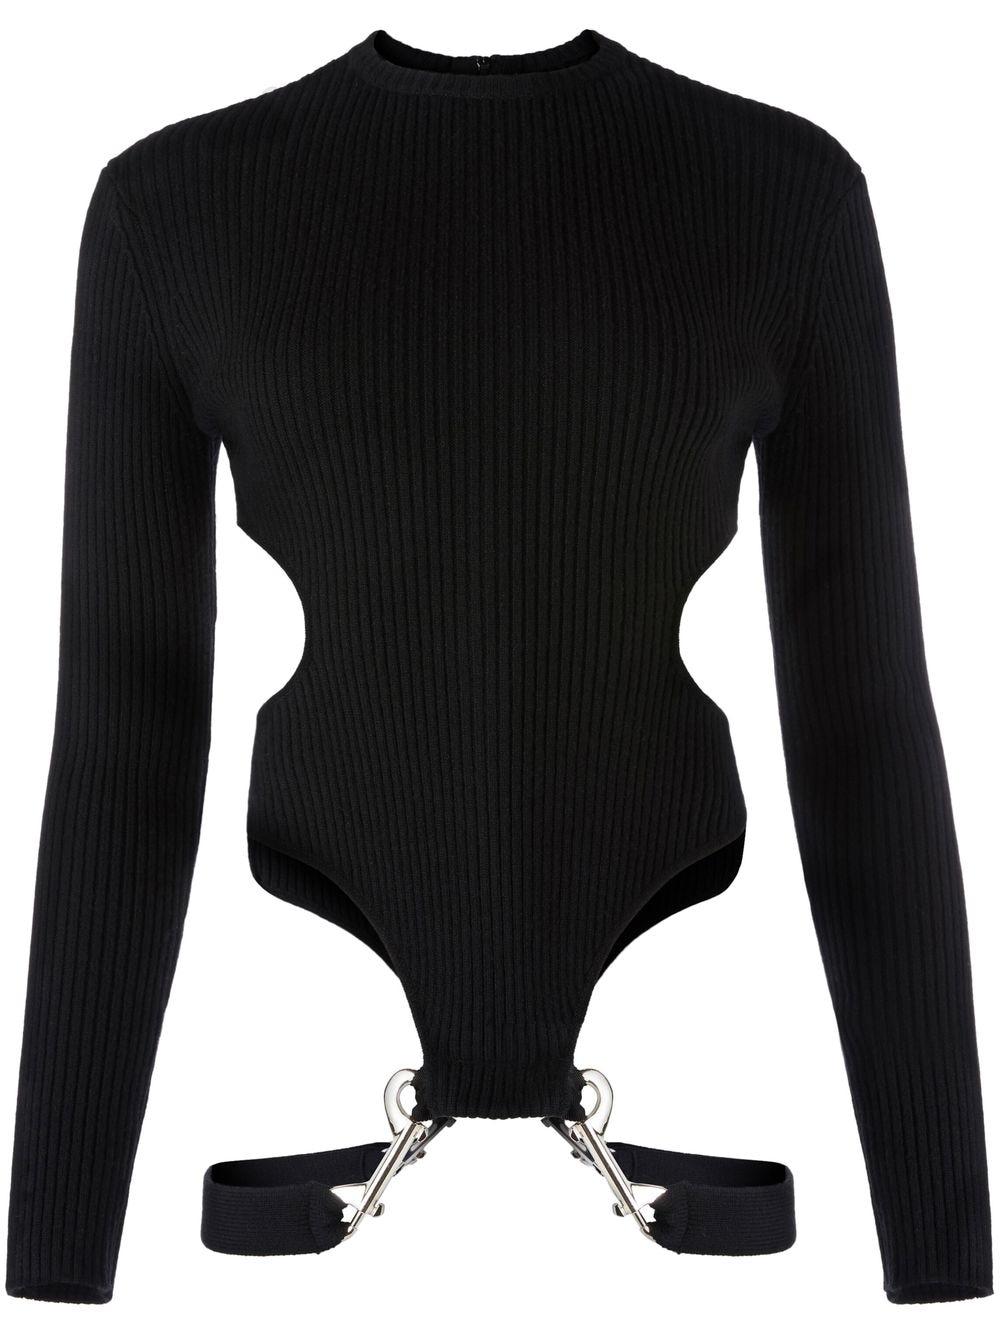 Christopher Kane Trigger Happy Cut-out Jumper in Black | Lyst